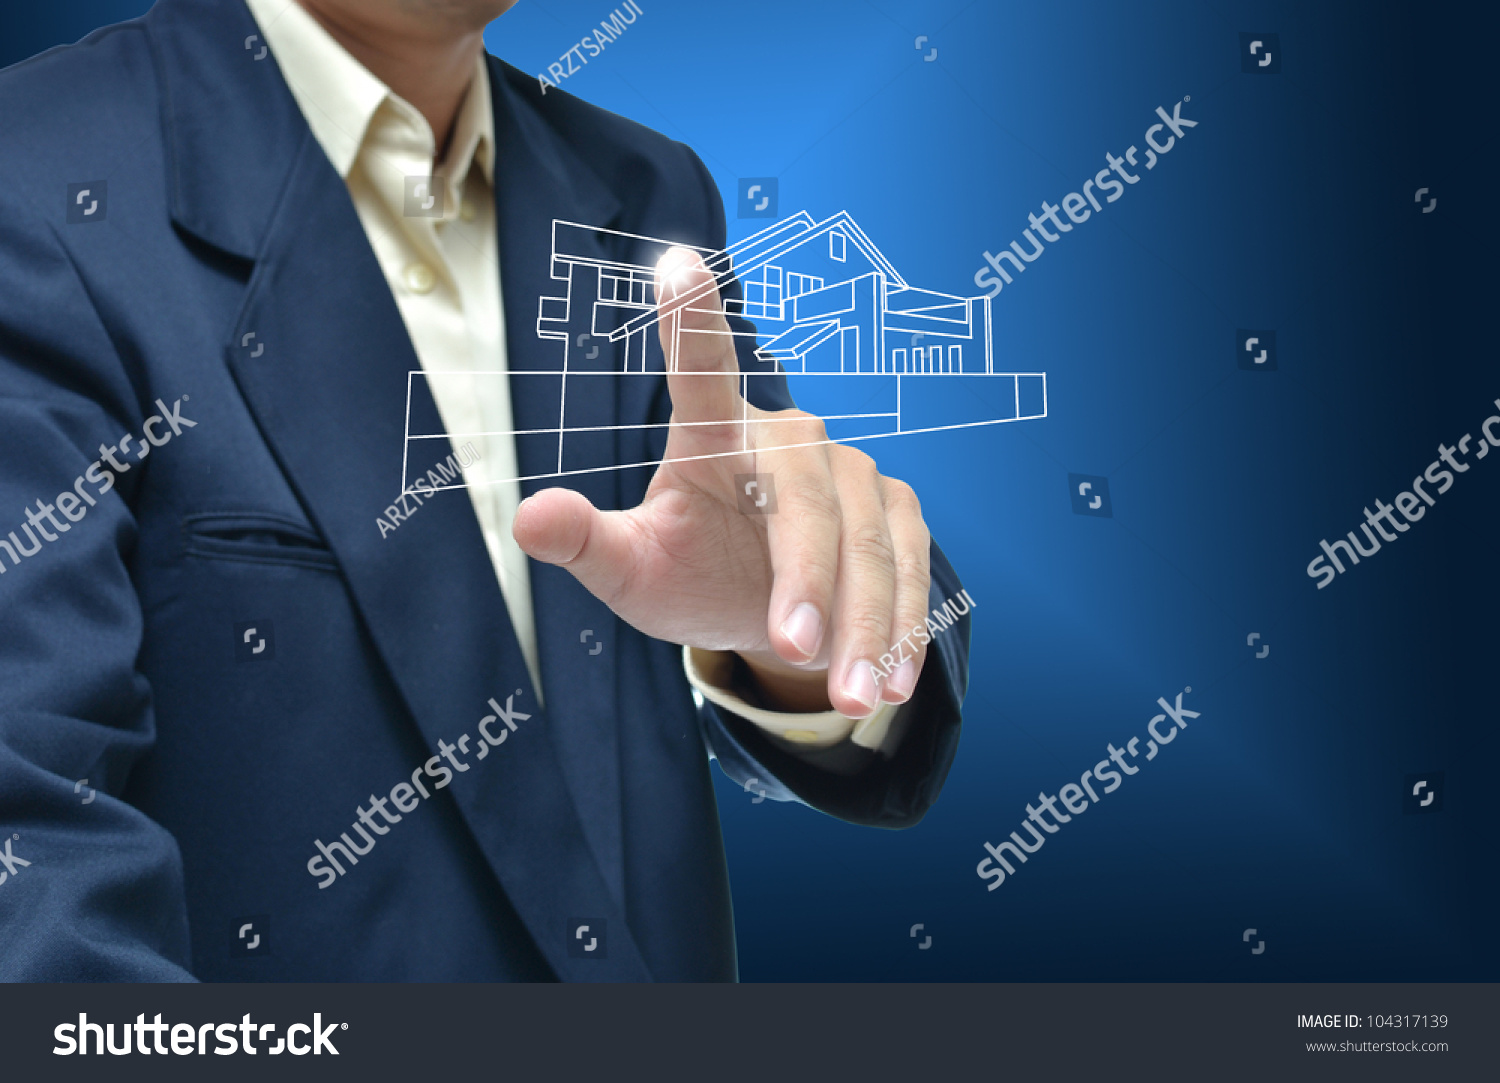 Business artwork of business person on nature background. #104317139